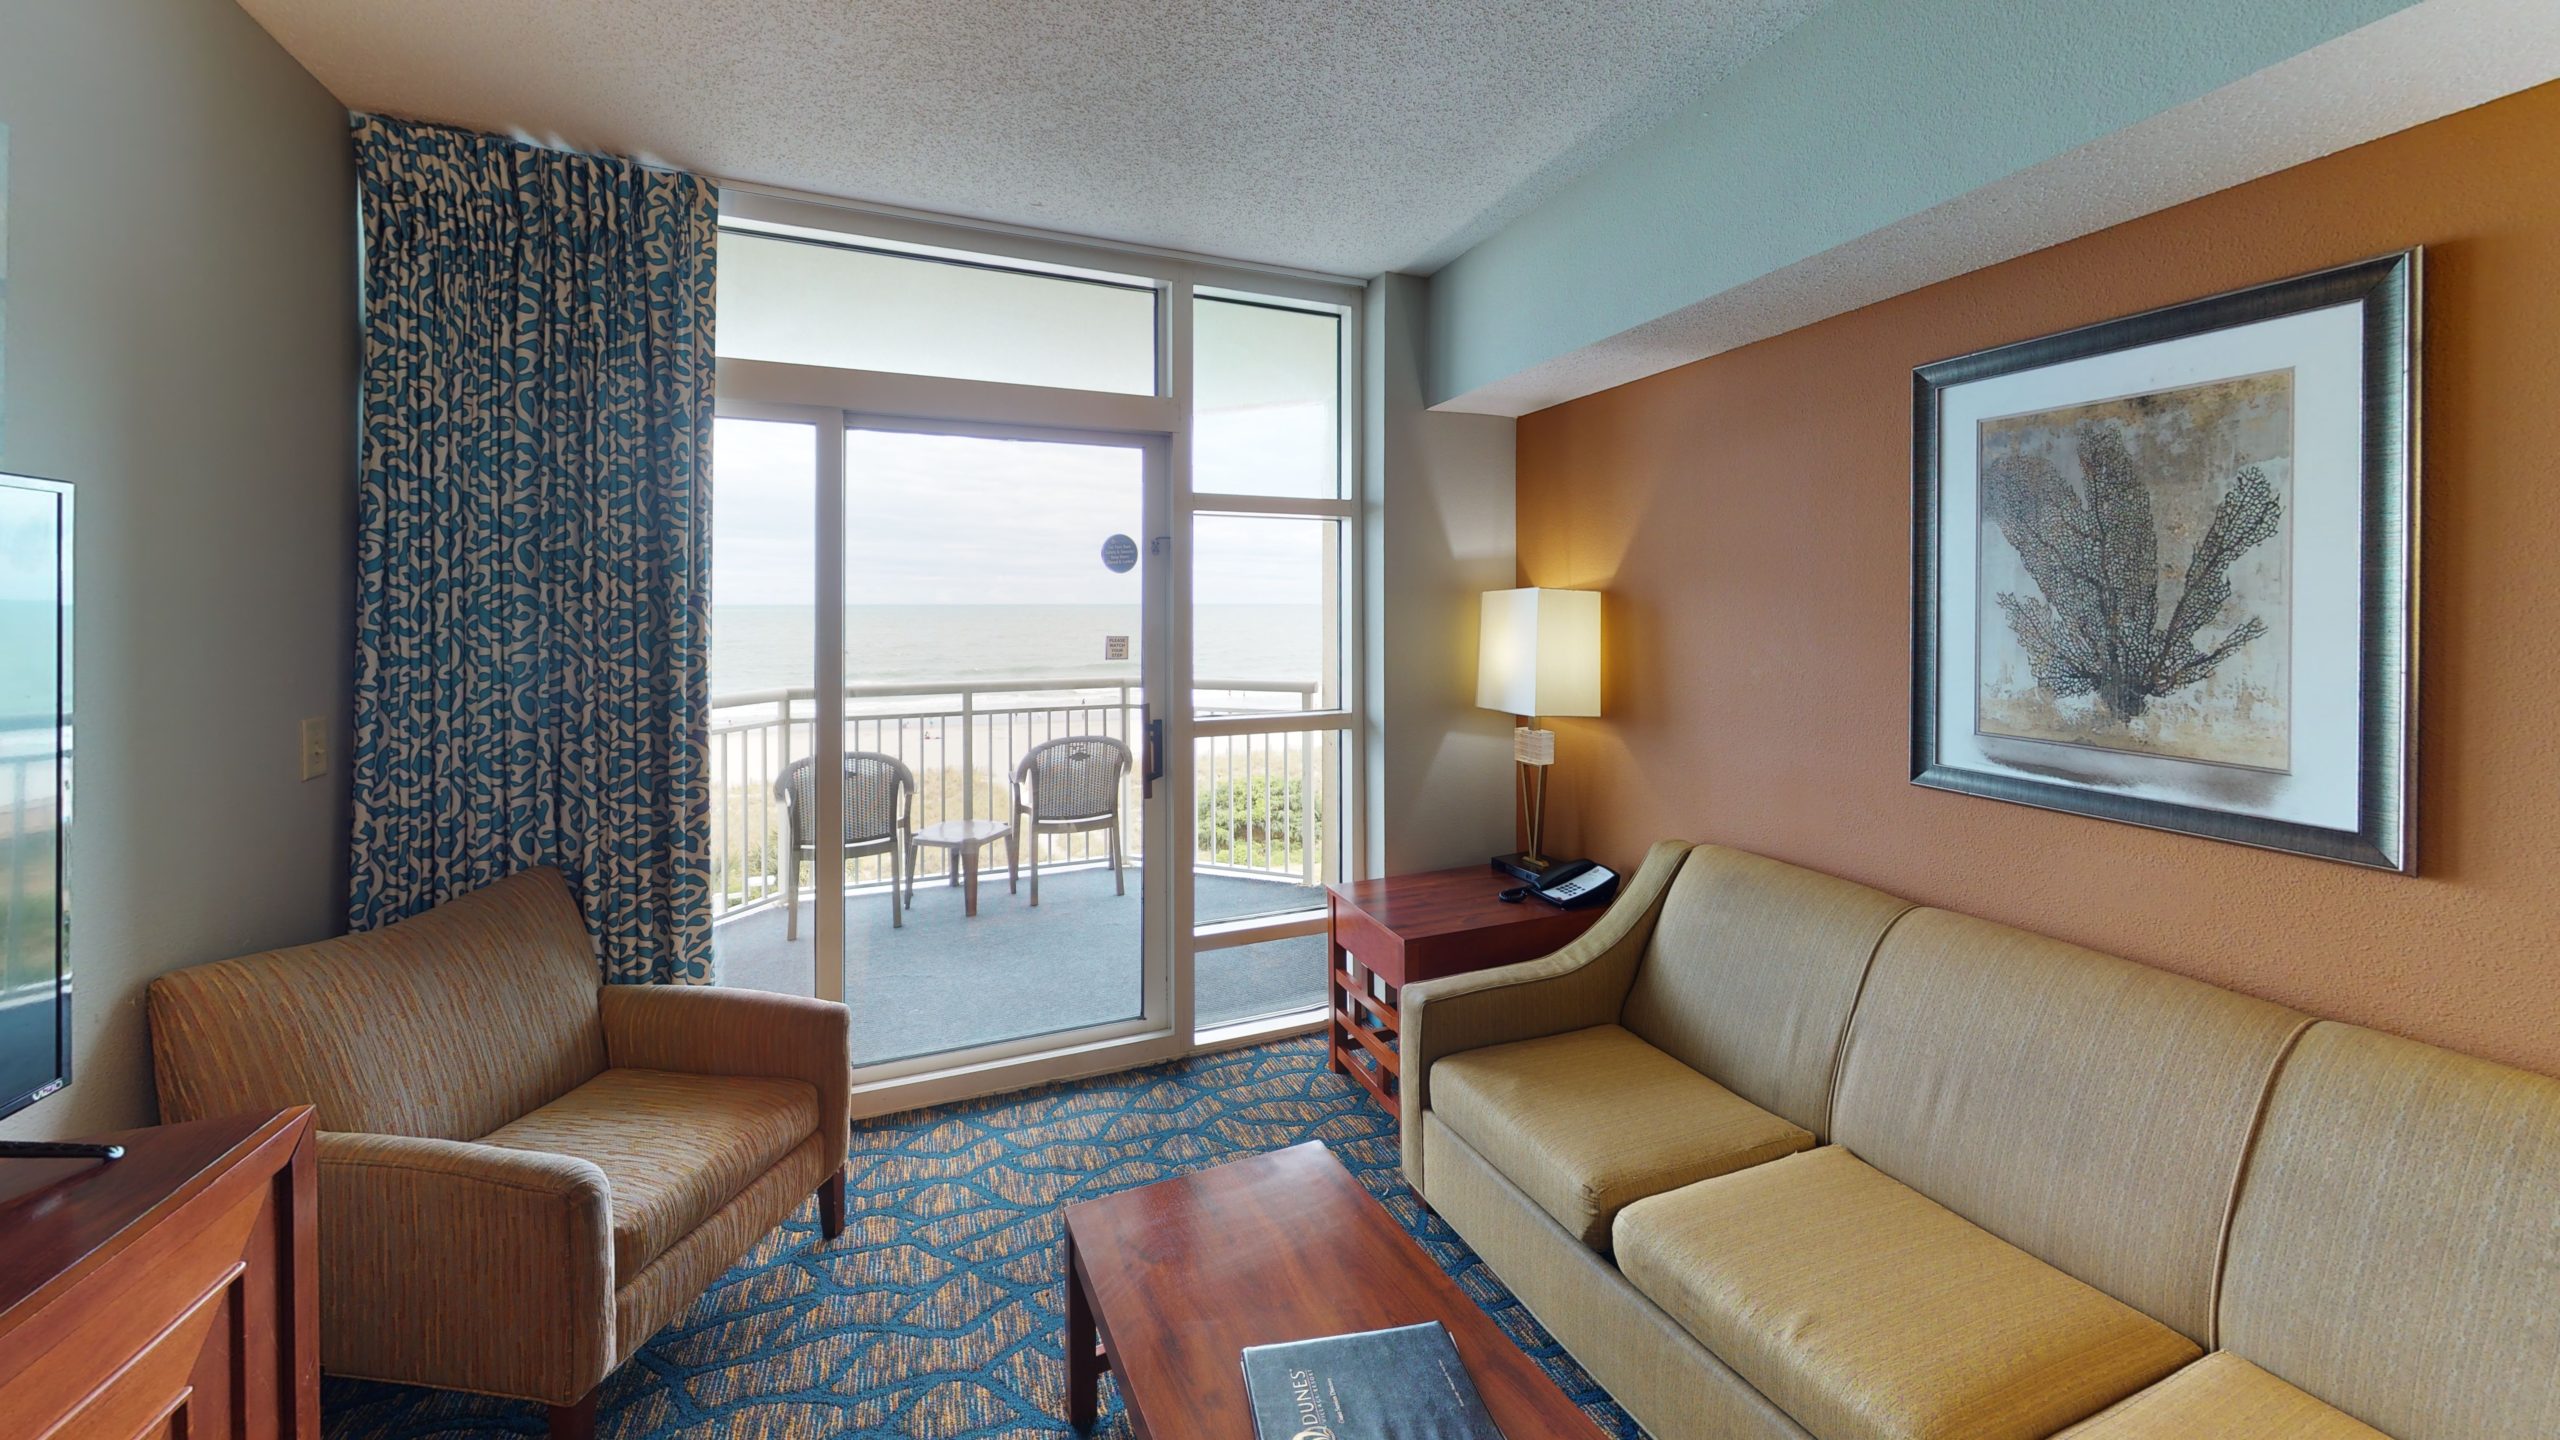 Dunes Village's spacious accommodations make it the best place to stay in Myrtle Beach with kids.